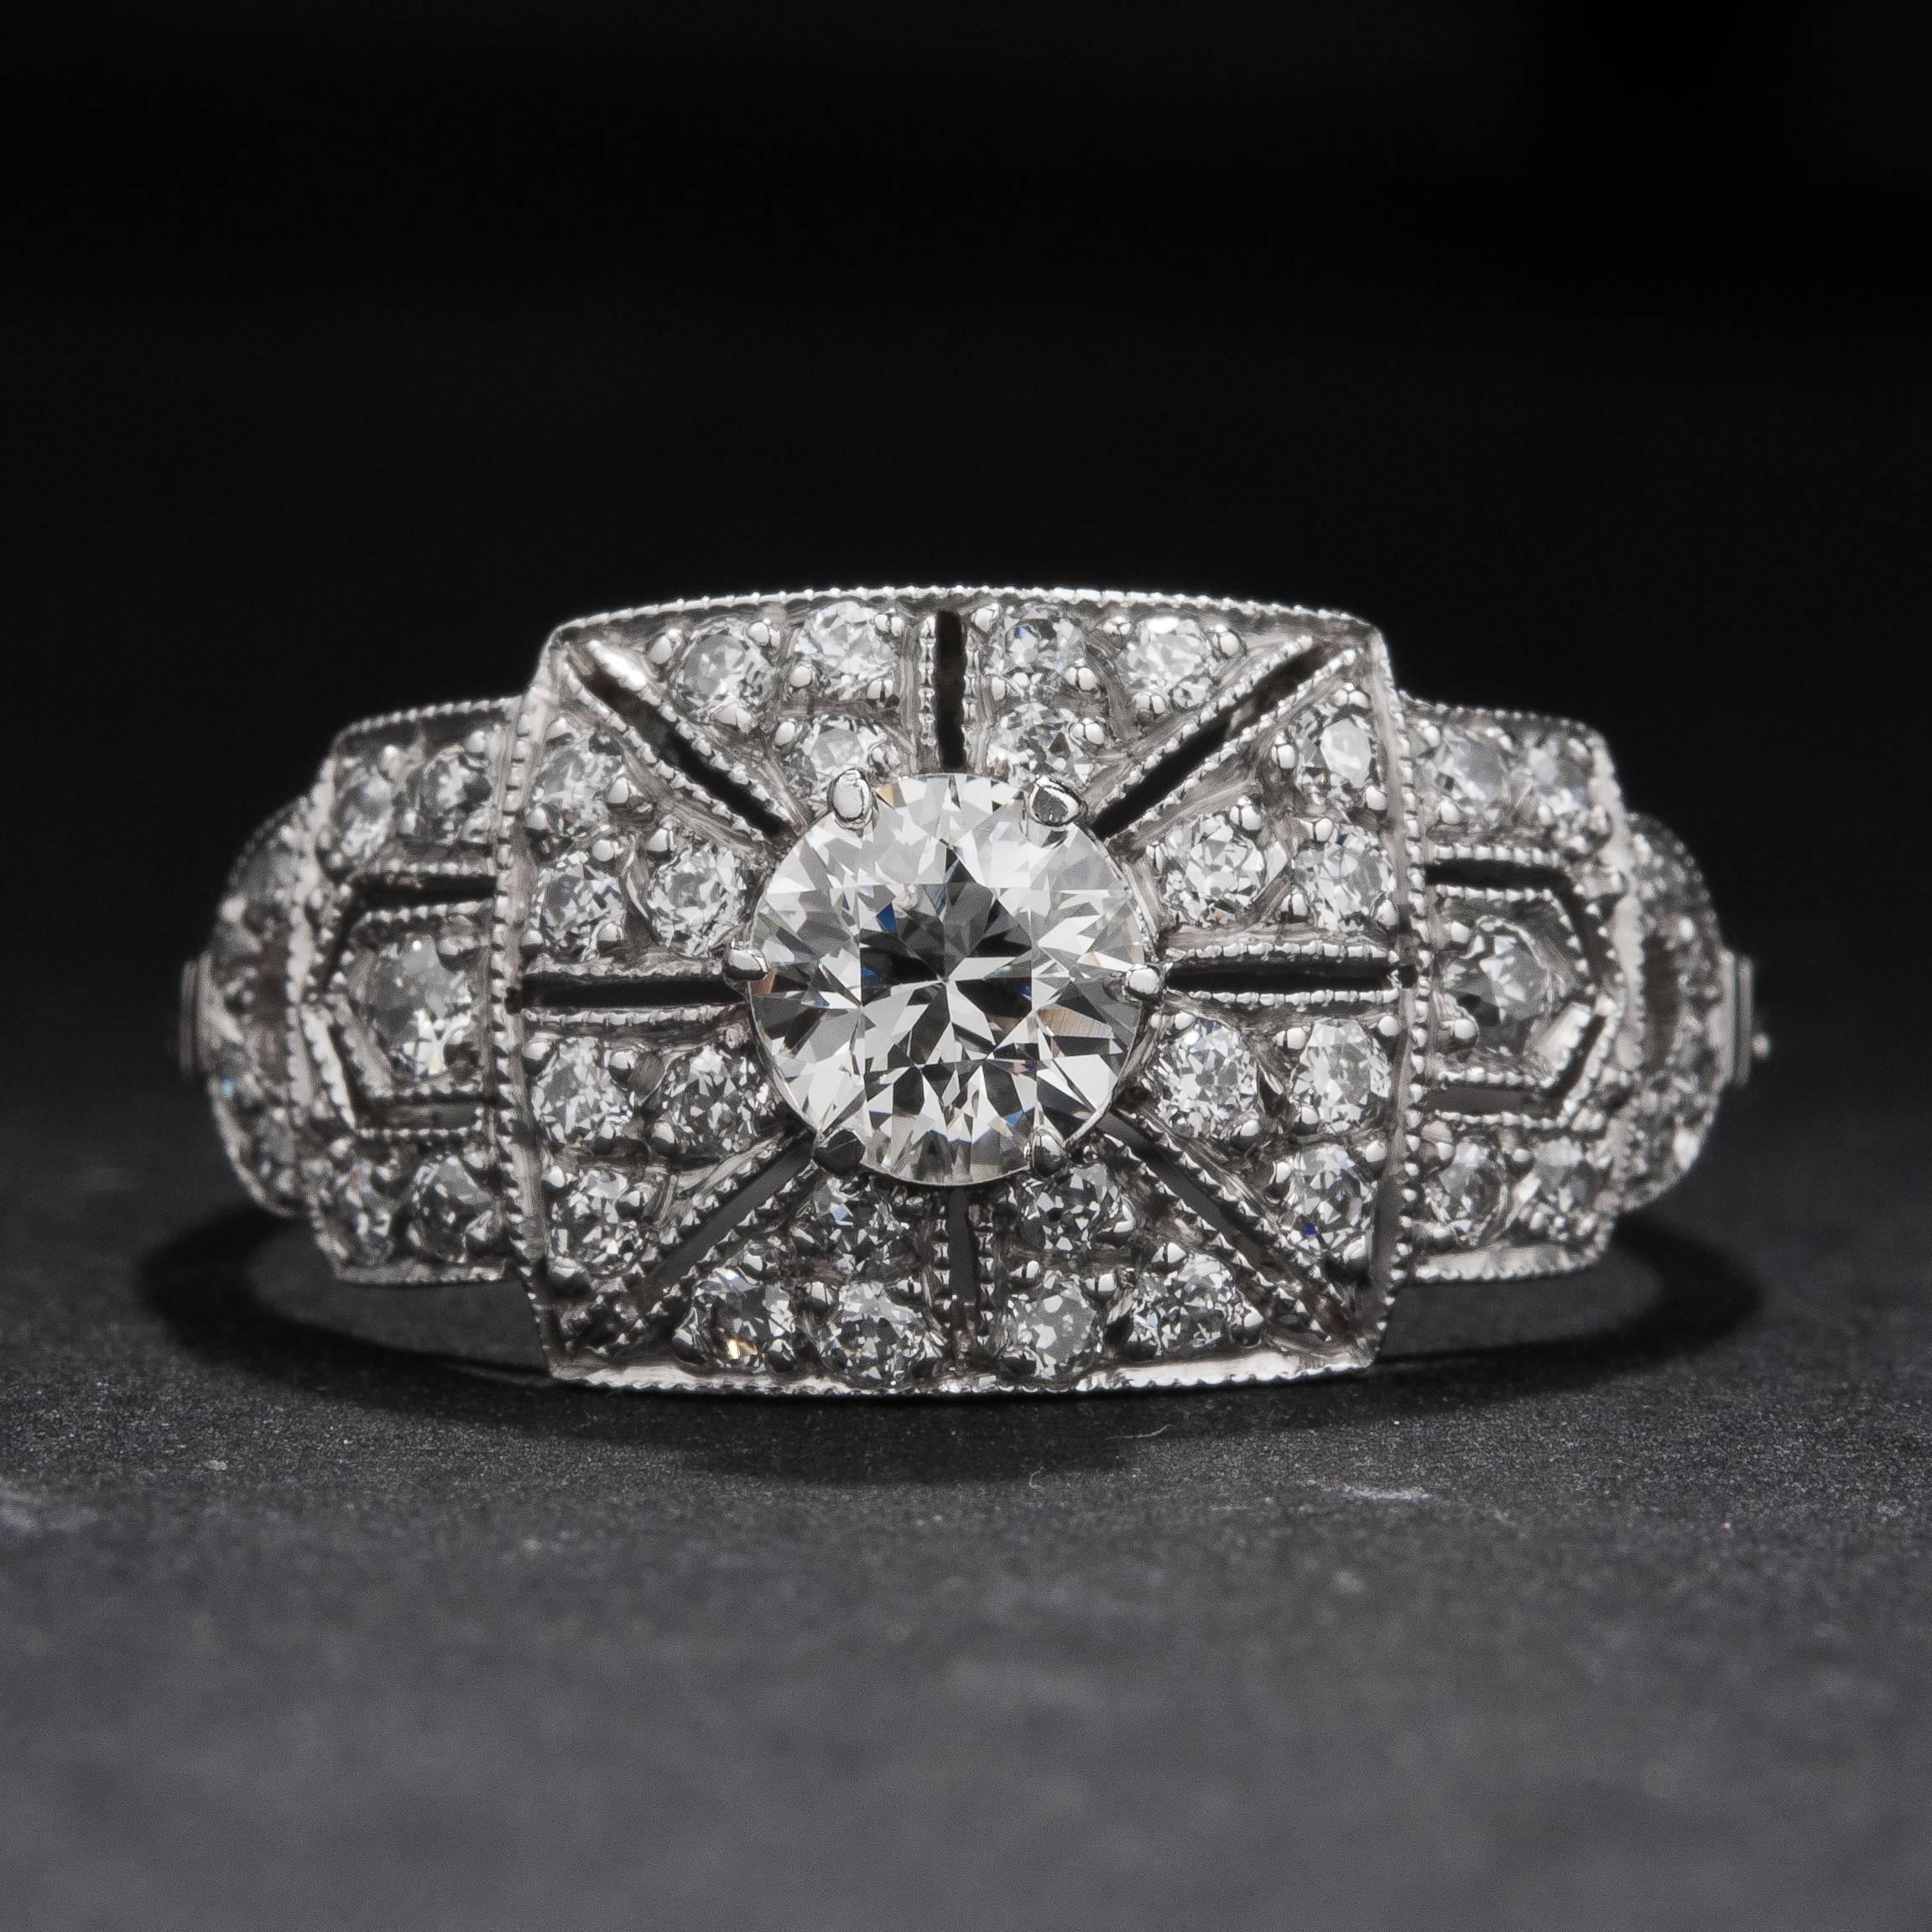 A lovely Art Deco style ring with a .36 carat center diamond and .40 total carats of accent diamonds. This piece is made in platinum and is currently size 7.